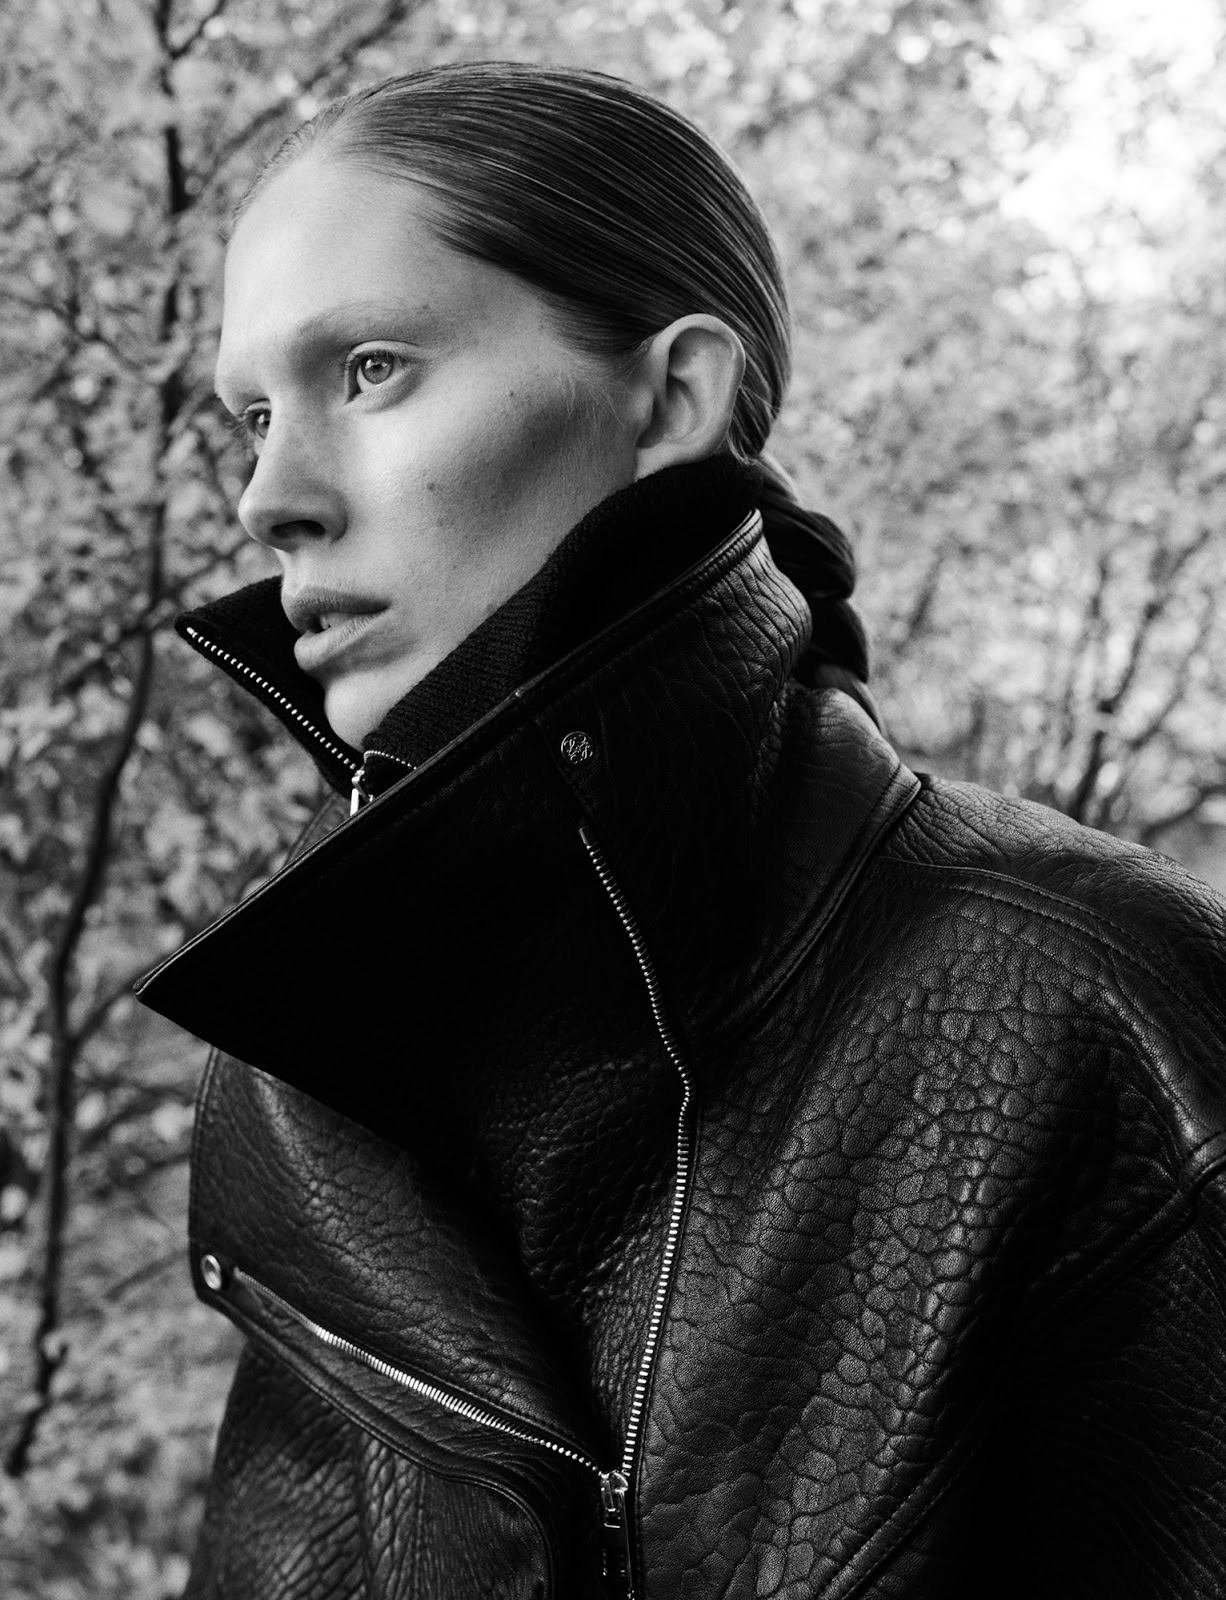 Iselin Steiro by Hasse Nielsen for Cover Magazine December 2015